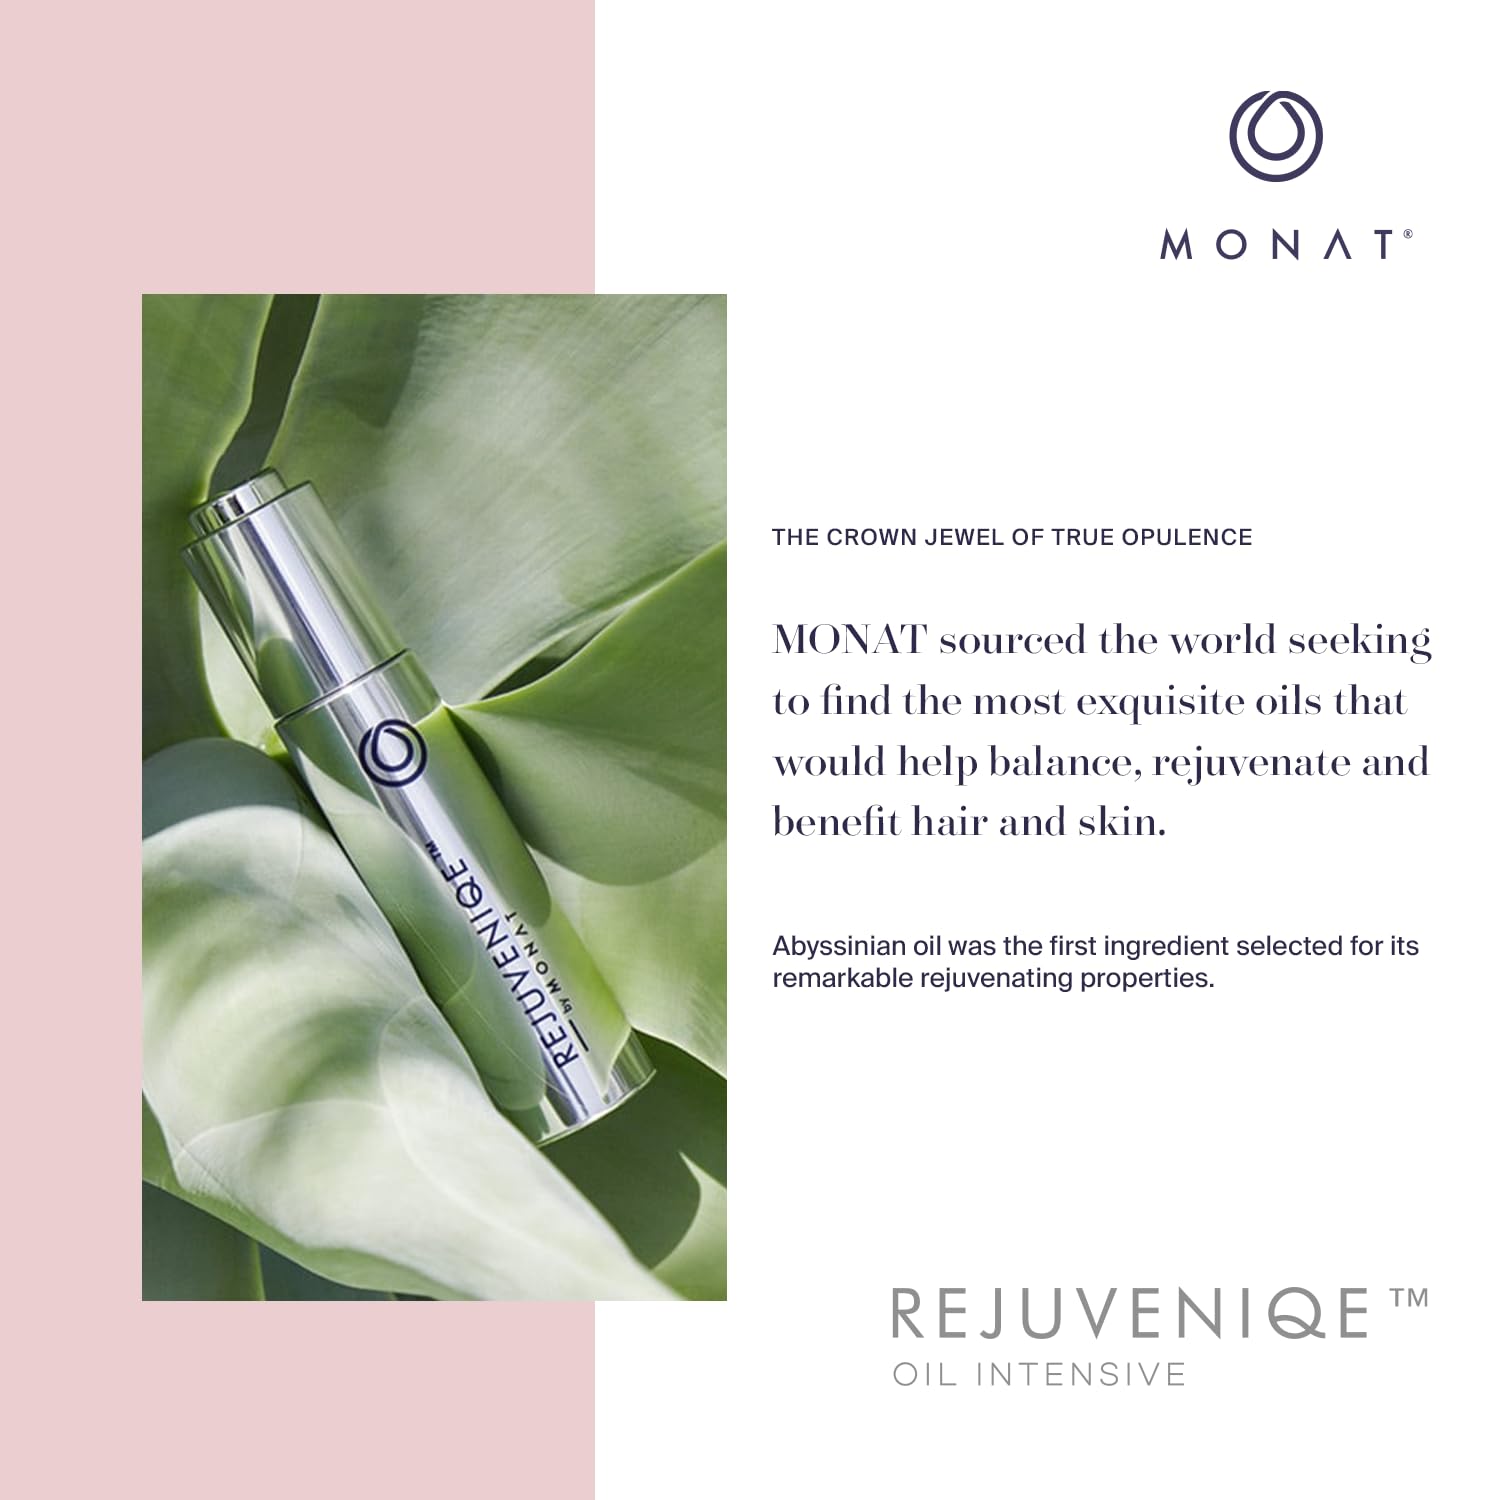 MONAT REJUVENIQE® Oil Multi-Purpose Hair & Skin Treatment with 13+ Natural Plant and Essential Oils, Hydrates and Strengthens, 30 ml (1.0 fl.oz.) : Beauty & Personal Care